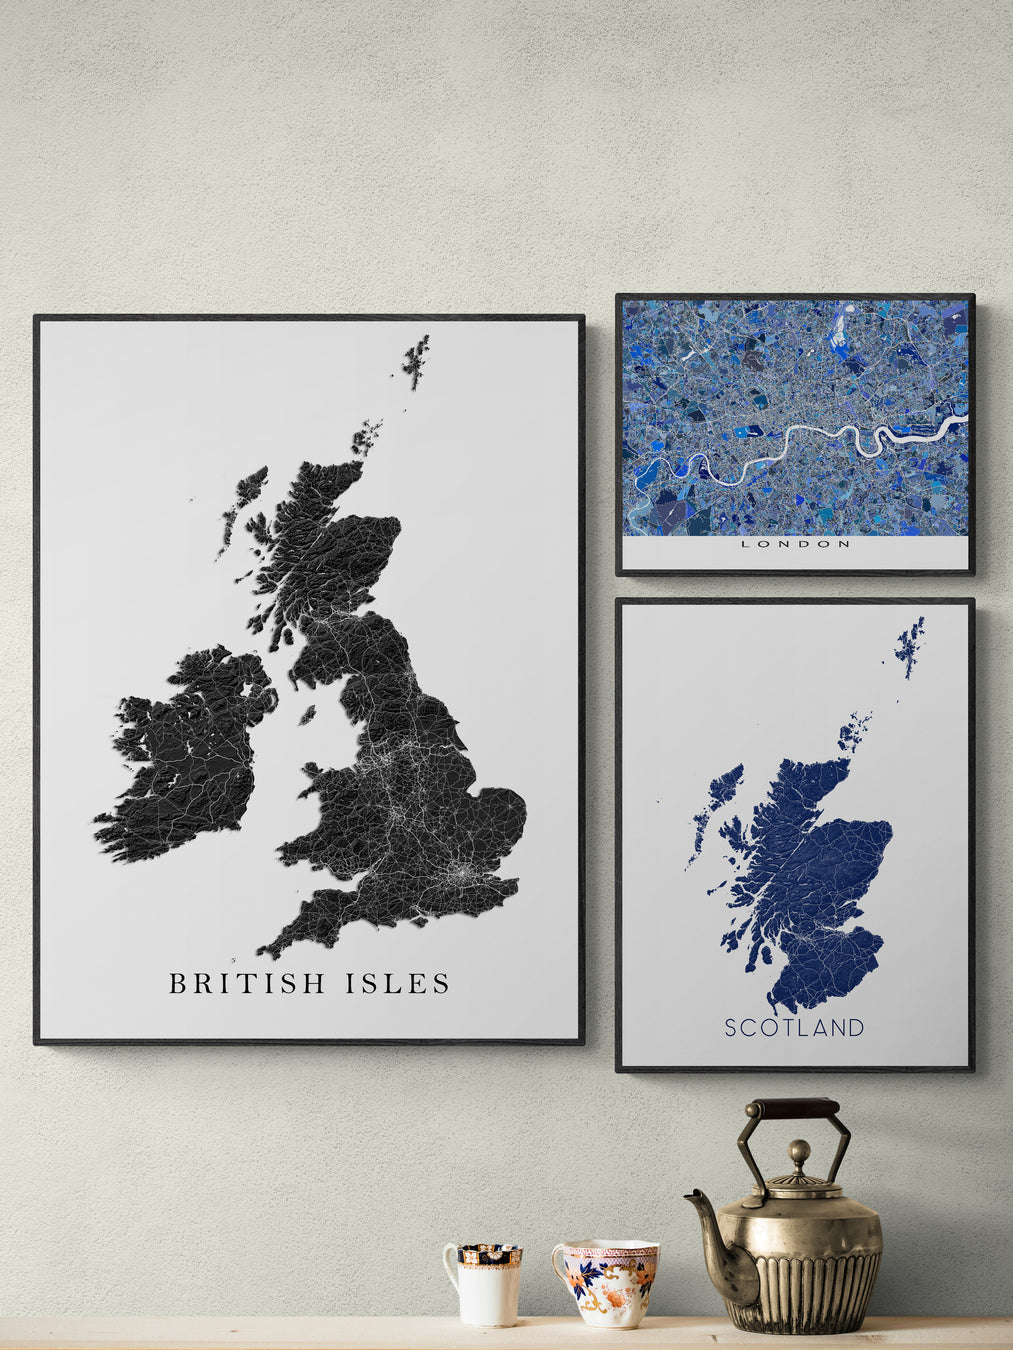 A british isles collection of map art prints by Maps As Art.